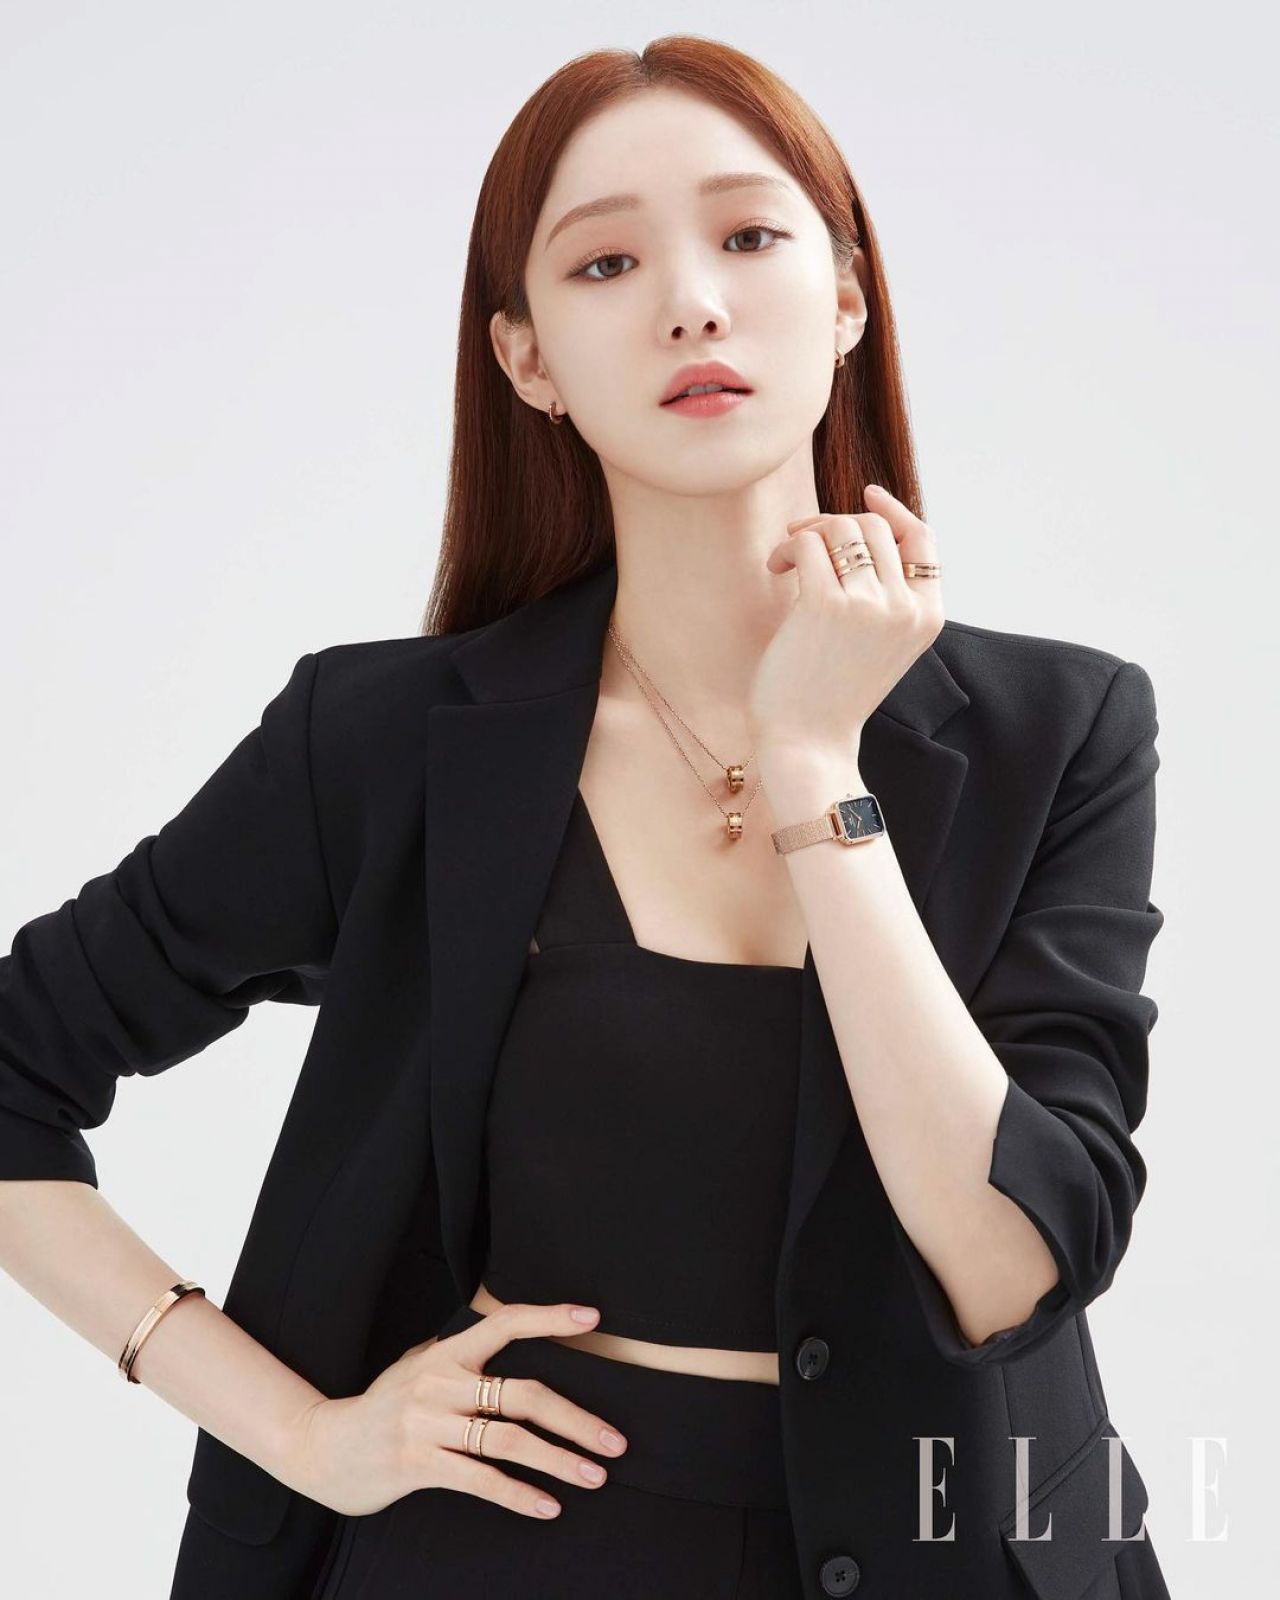 Lee sung kyung